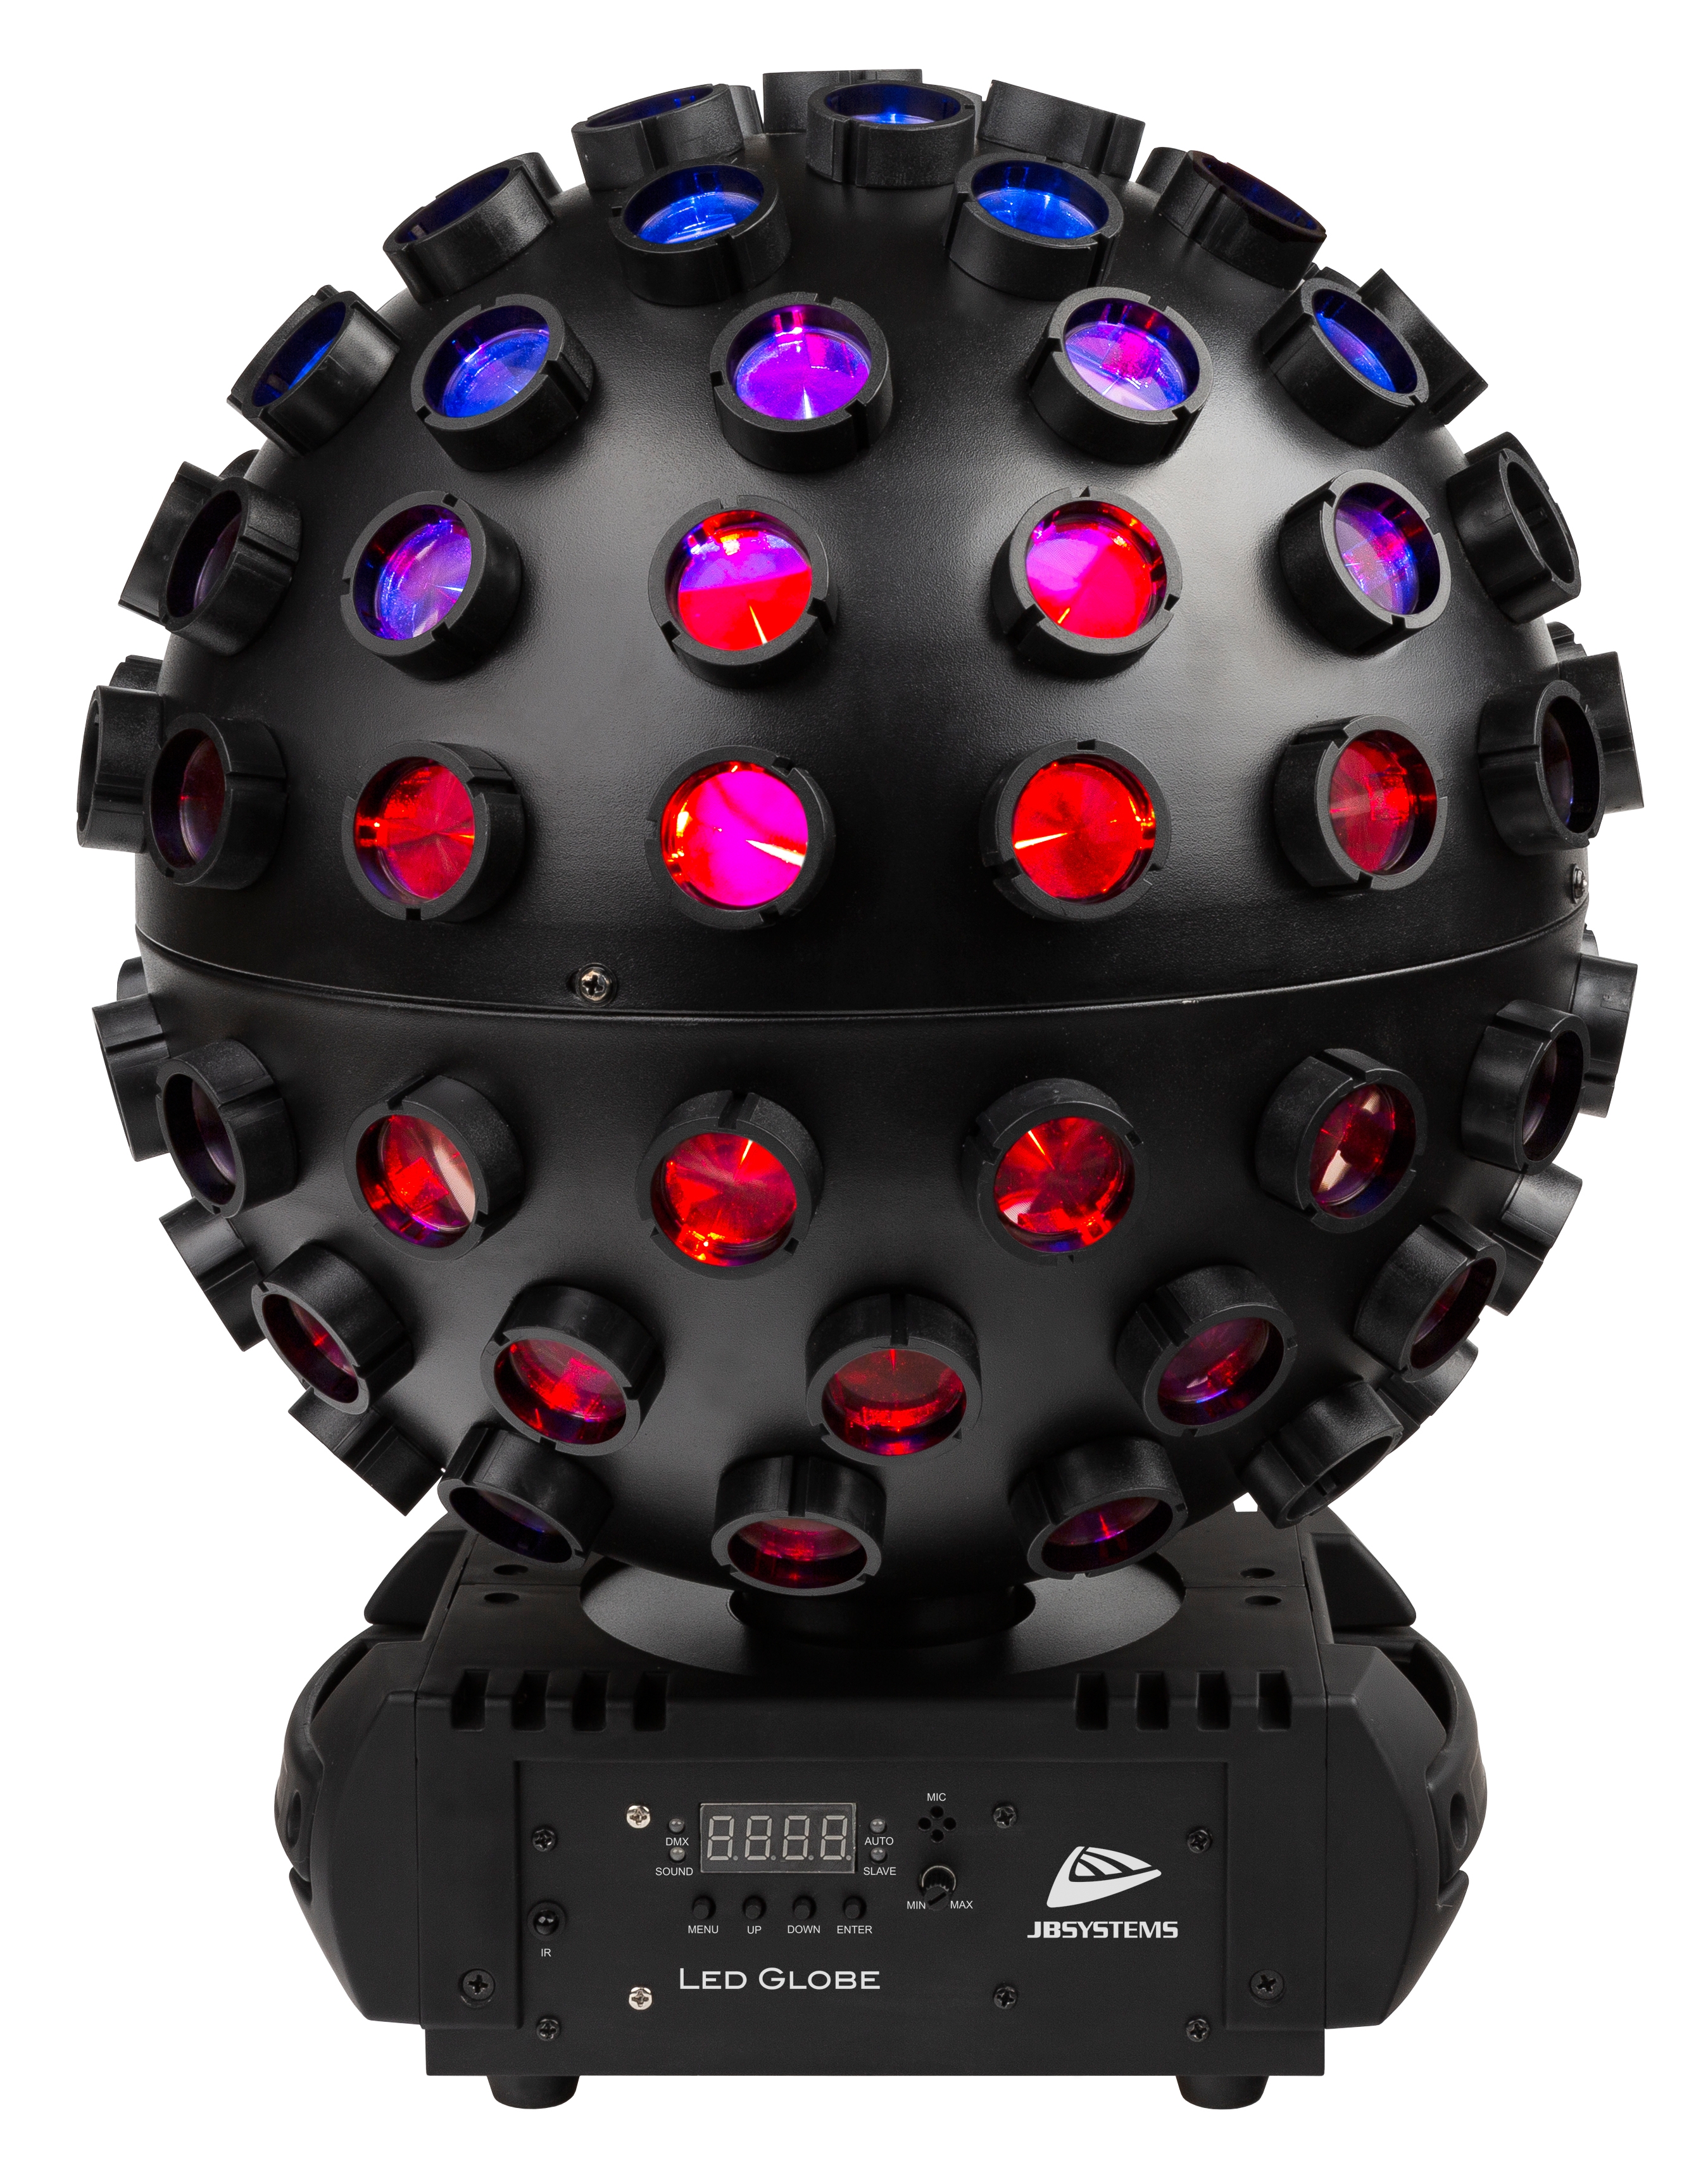 LED GLOBE is the perfect alternative for the classic mirror ball with pin spots!